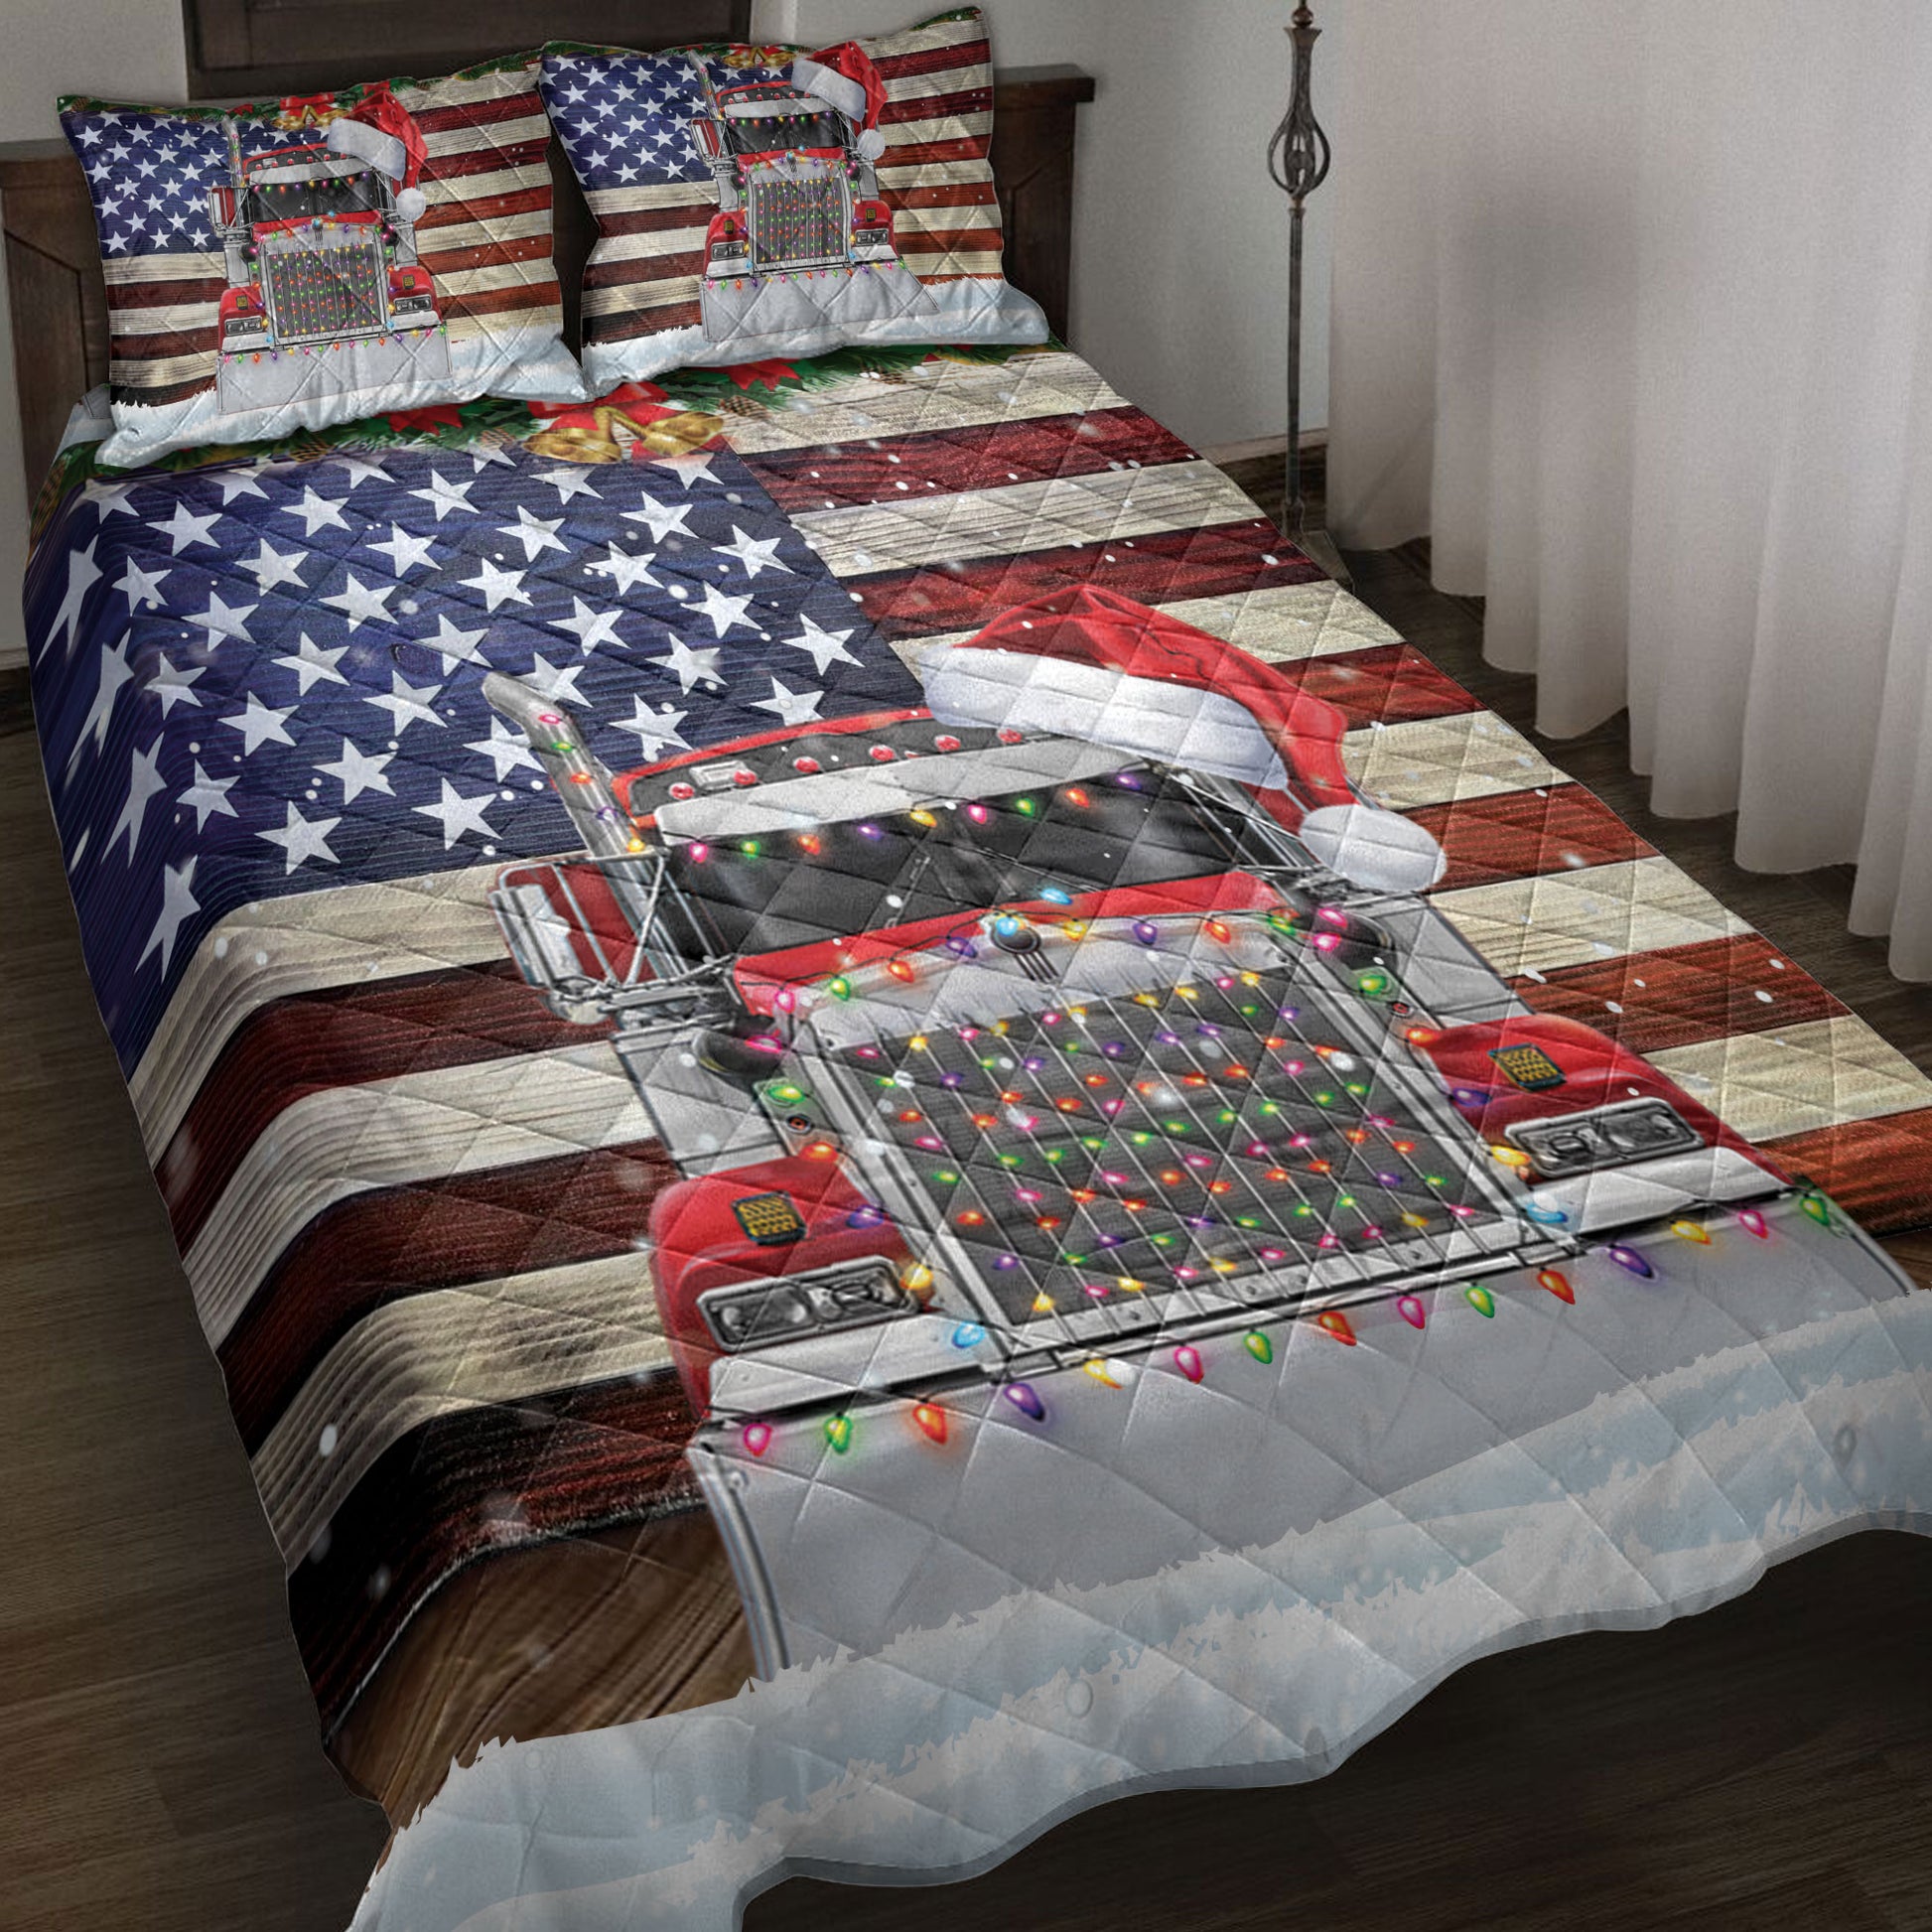 Ohaprints-Quilt-Bed-Set-Pillowcase-Red-Truck-Wearing-A-Christmas-Hat-With-String-Light-American-Flag-Blanket-Bedspread-Bedding-4120-Throw (55'' x 60'')